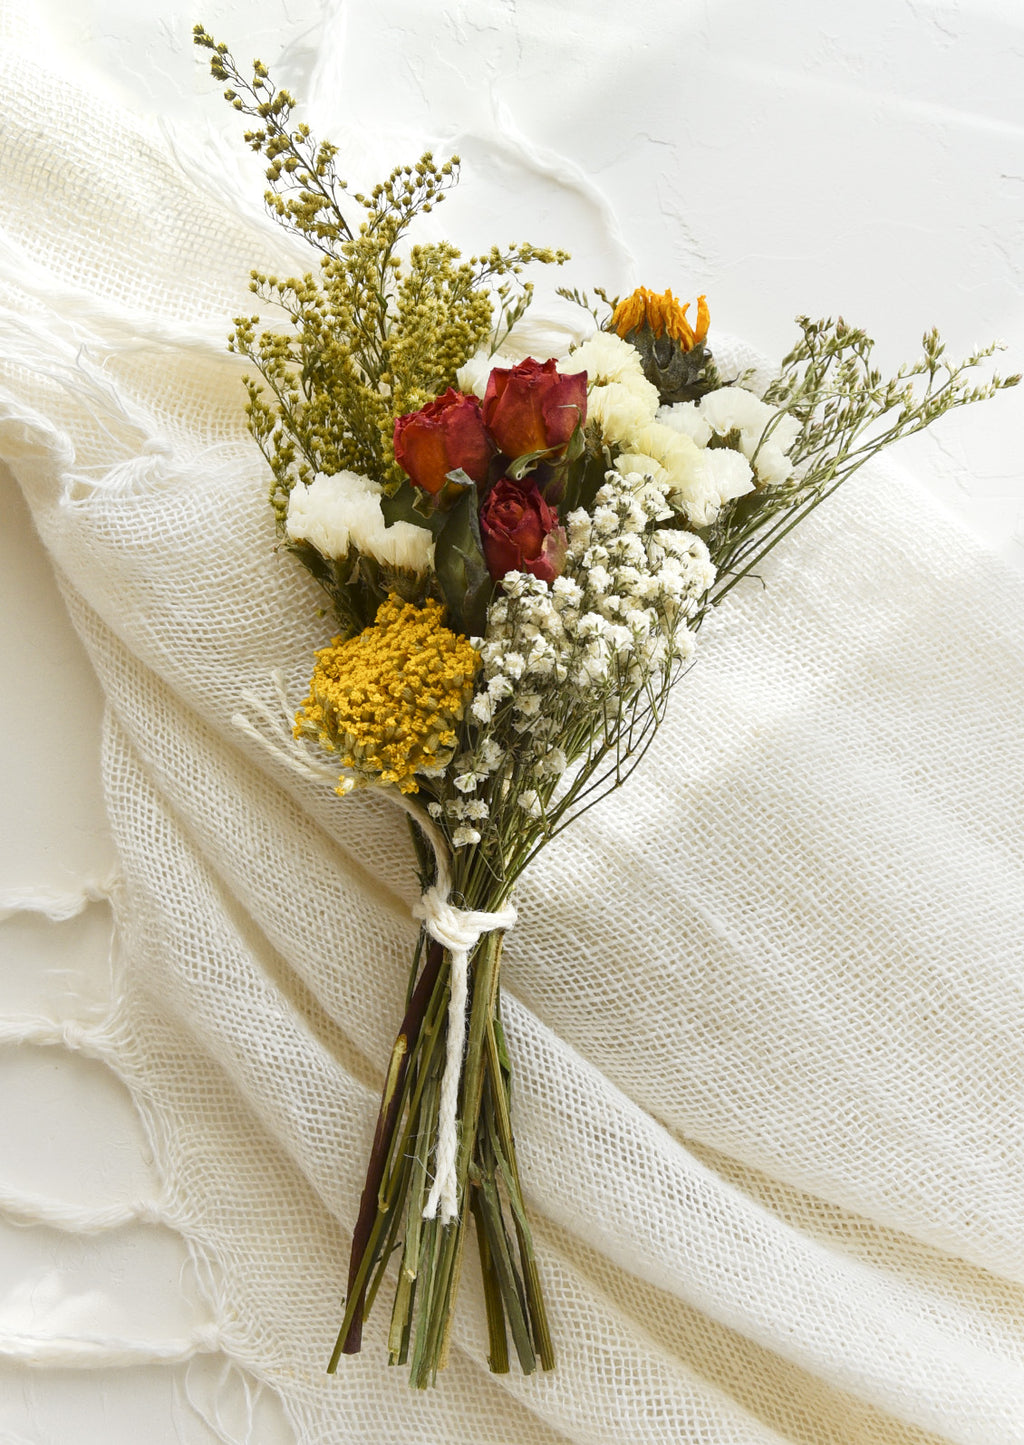 Prairie Multi: A bouquet of dried flowers in a red, yellow and white mix.